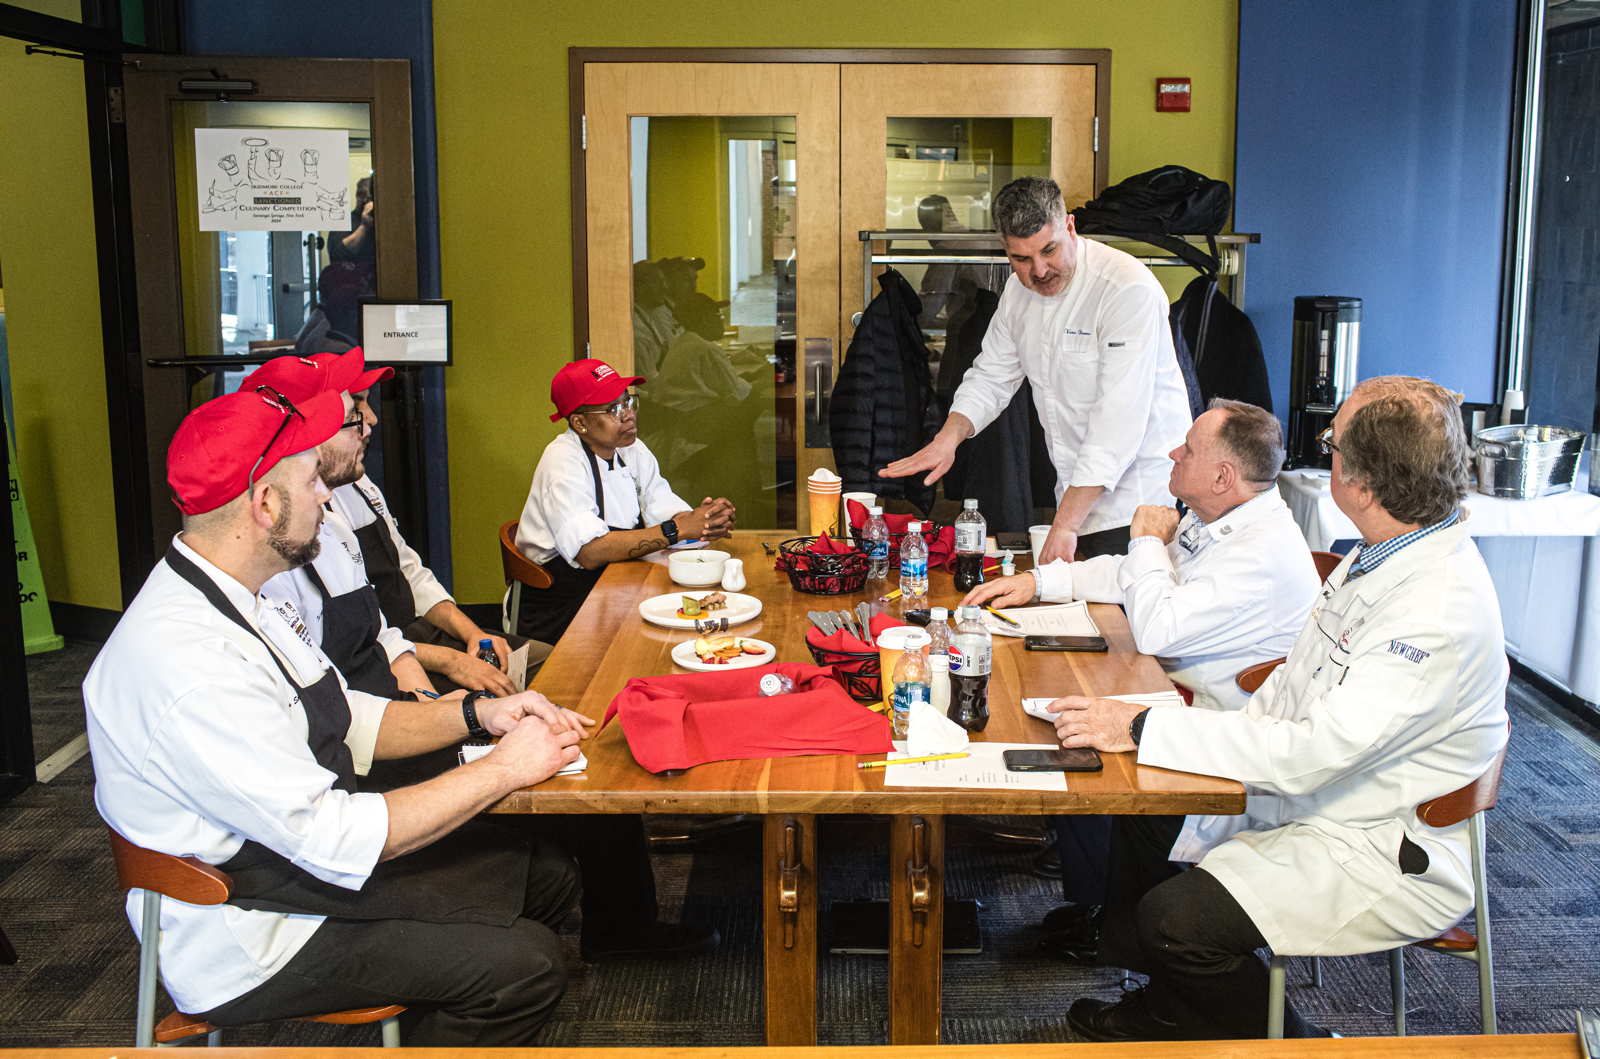 Several people wearing chef coats sit around a table while another stands at the corner of the table